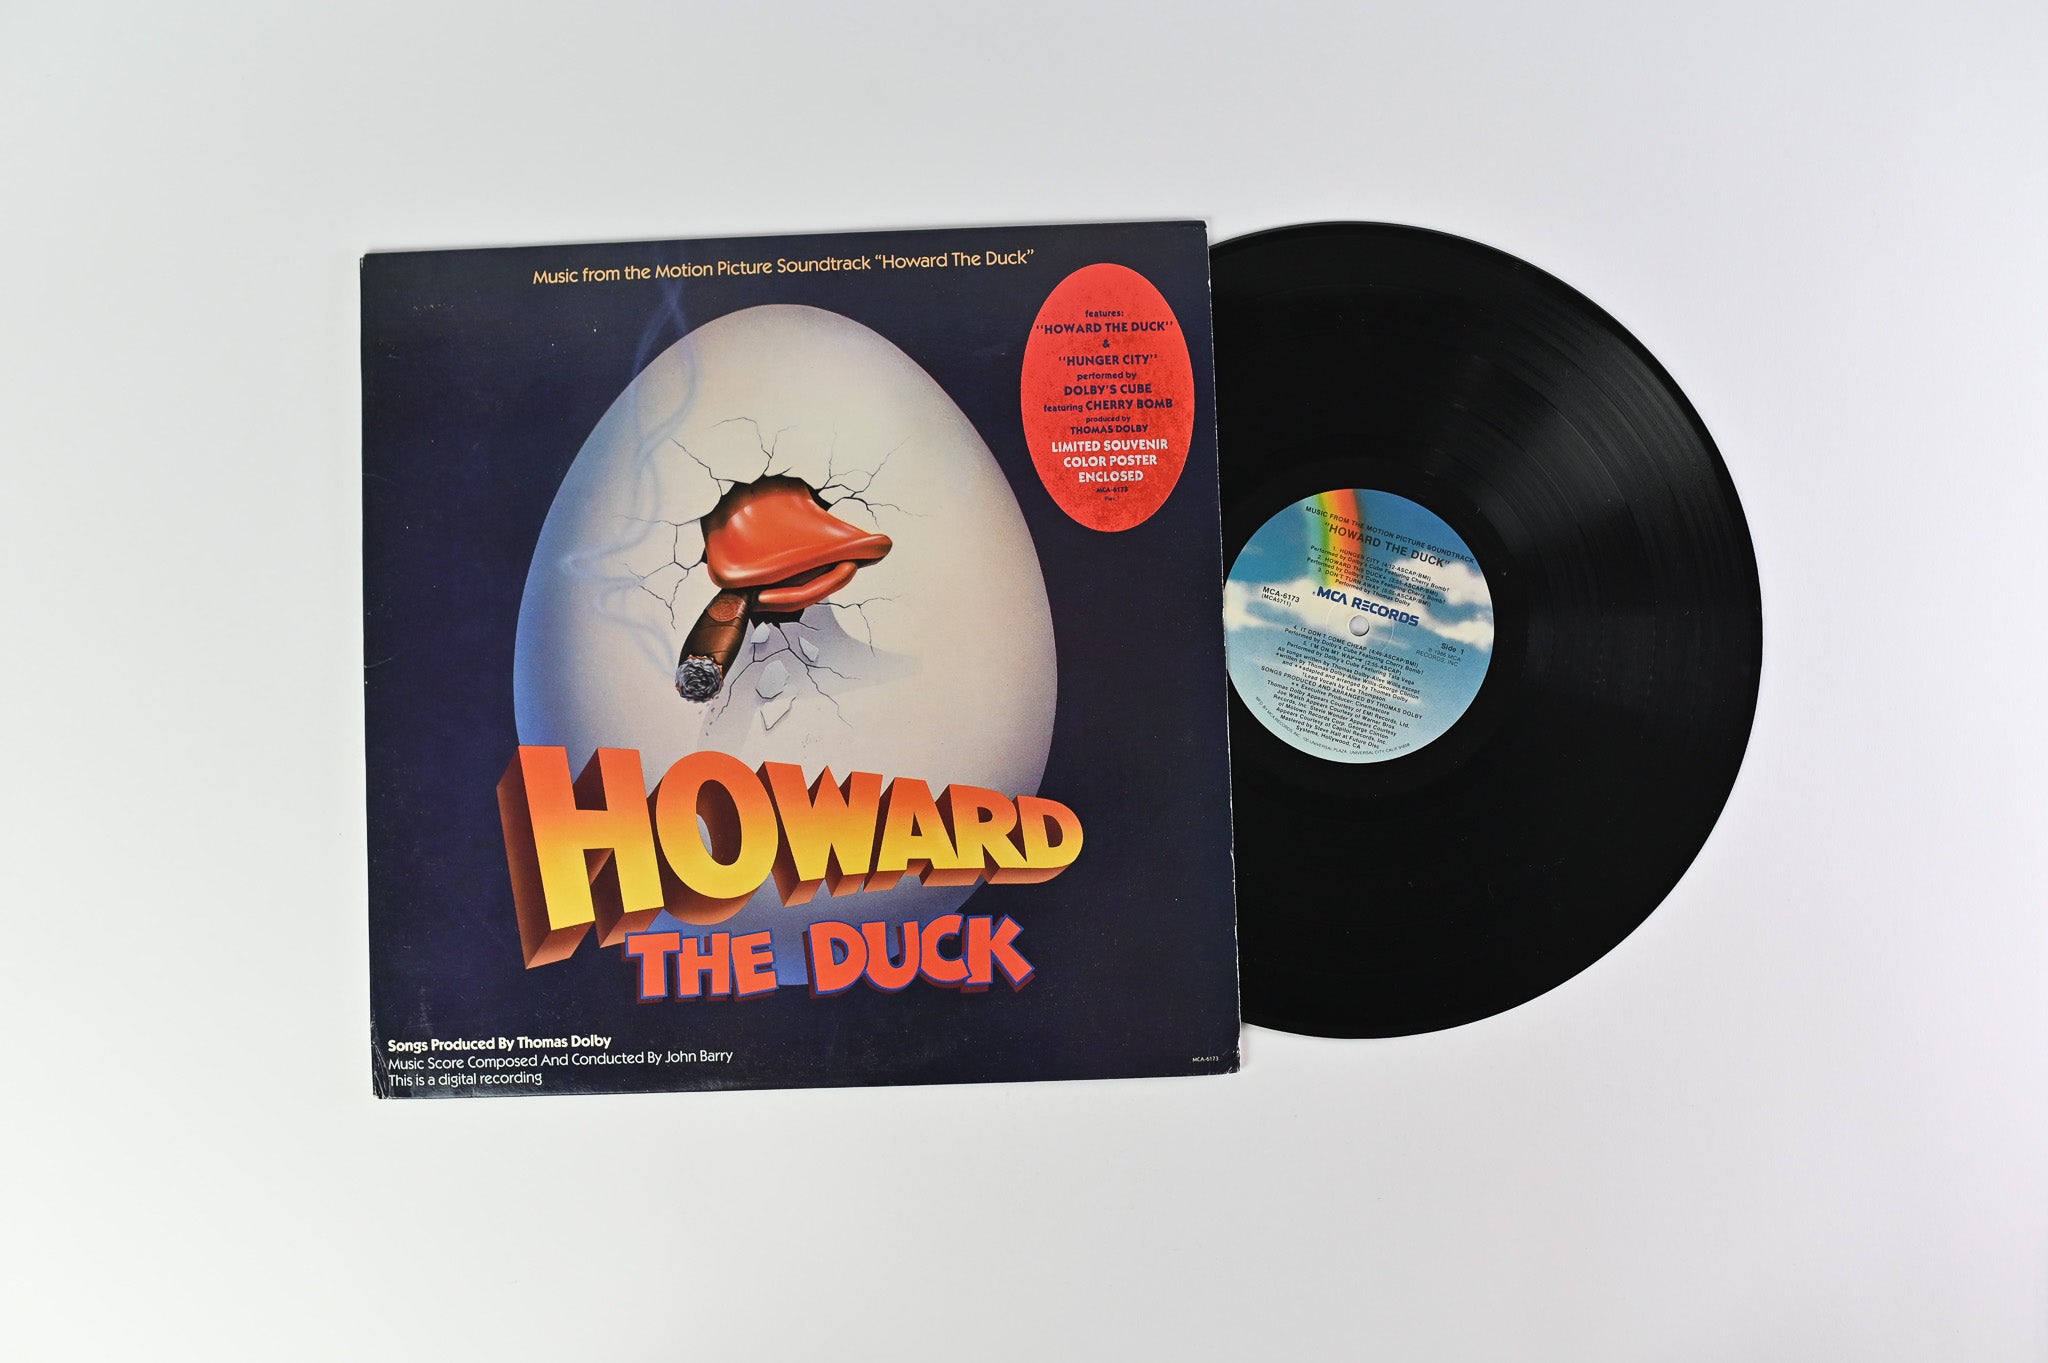 John Barry - Howard The Duck (Music From The Motion Picture Soundtrack) on MCA Records